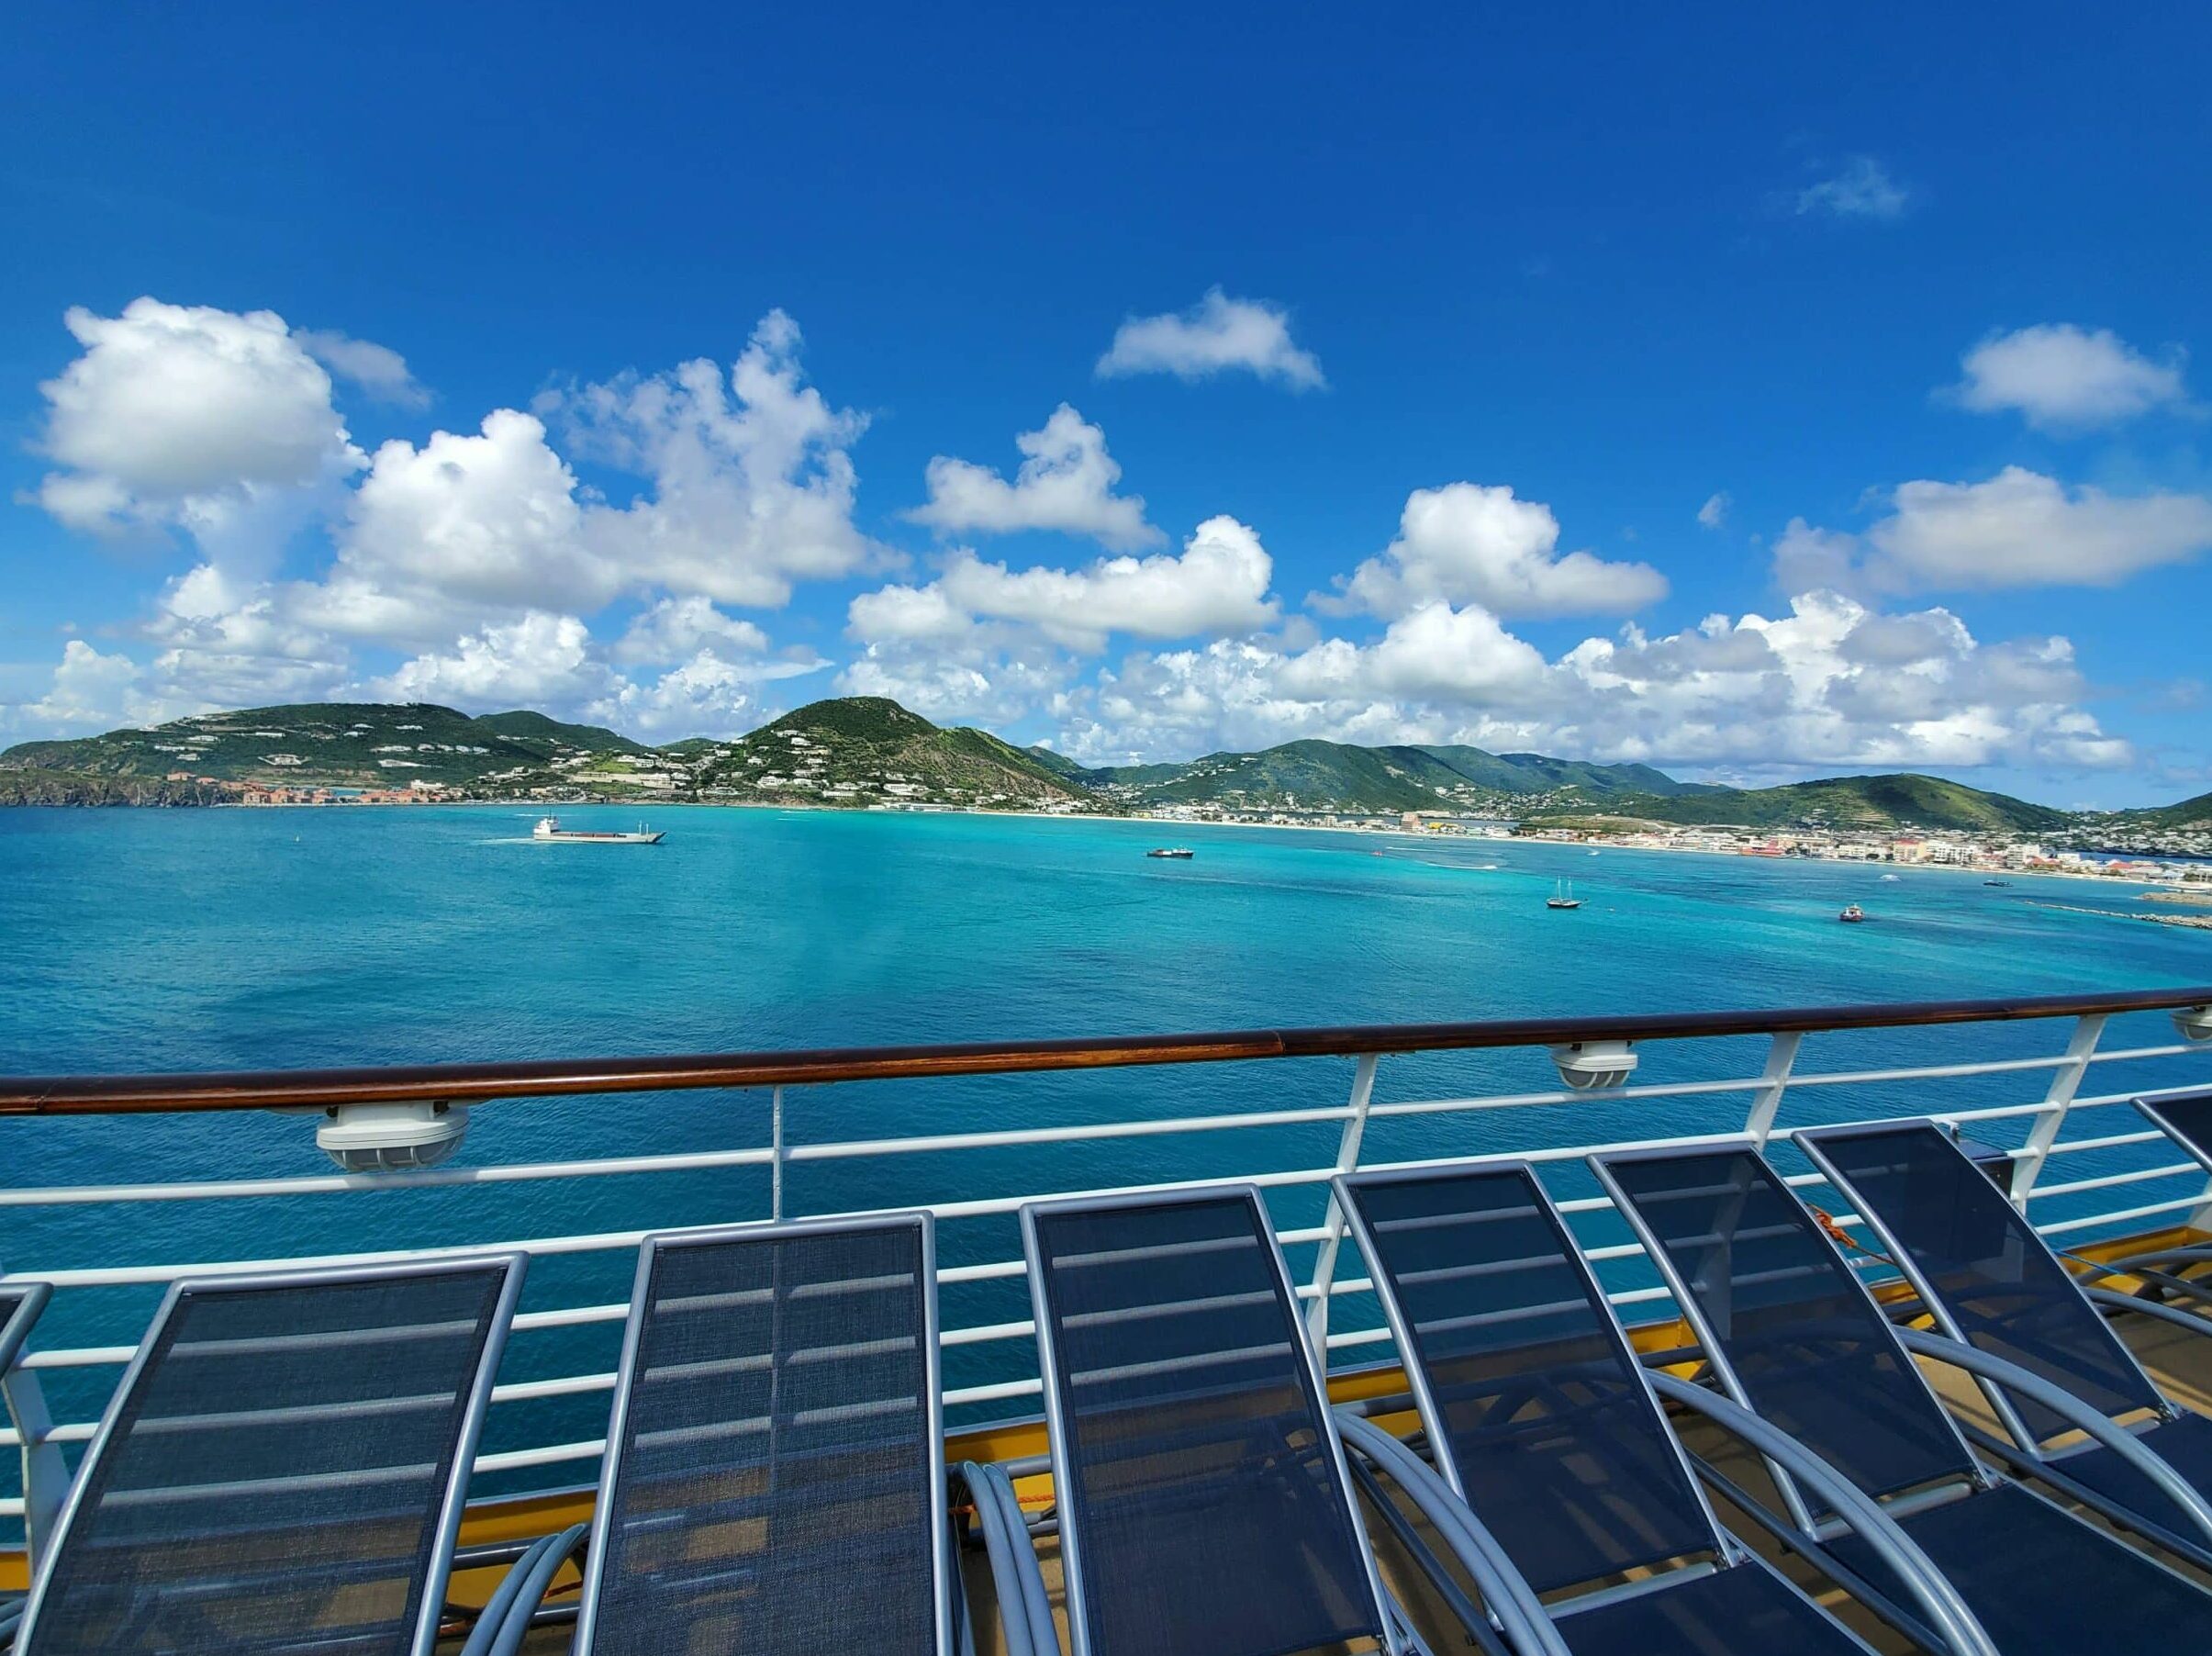 On a cruise Ship called Allure of the seas. Here's a beautiful view of St Maarten